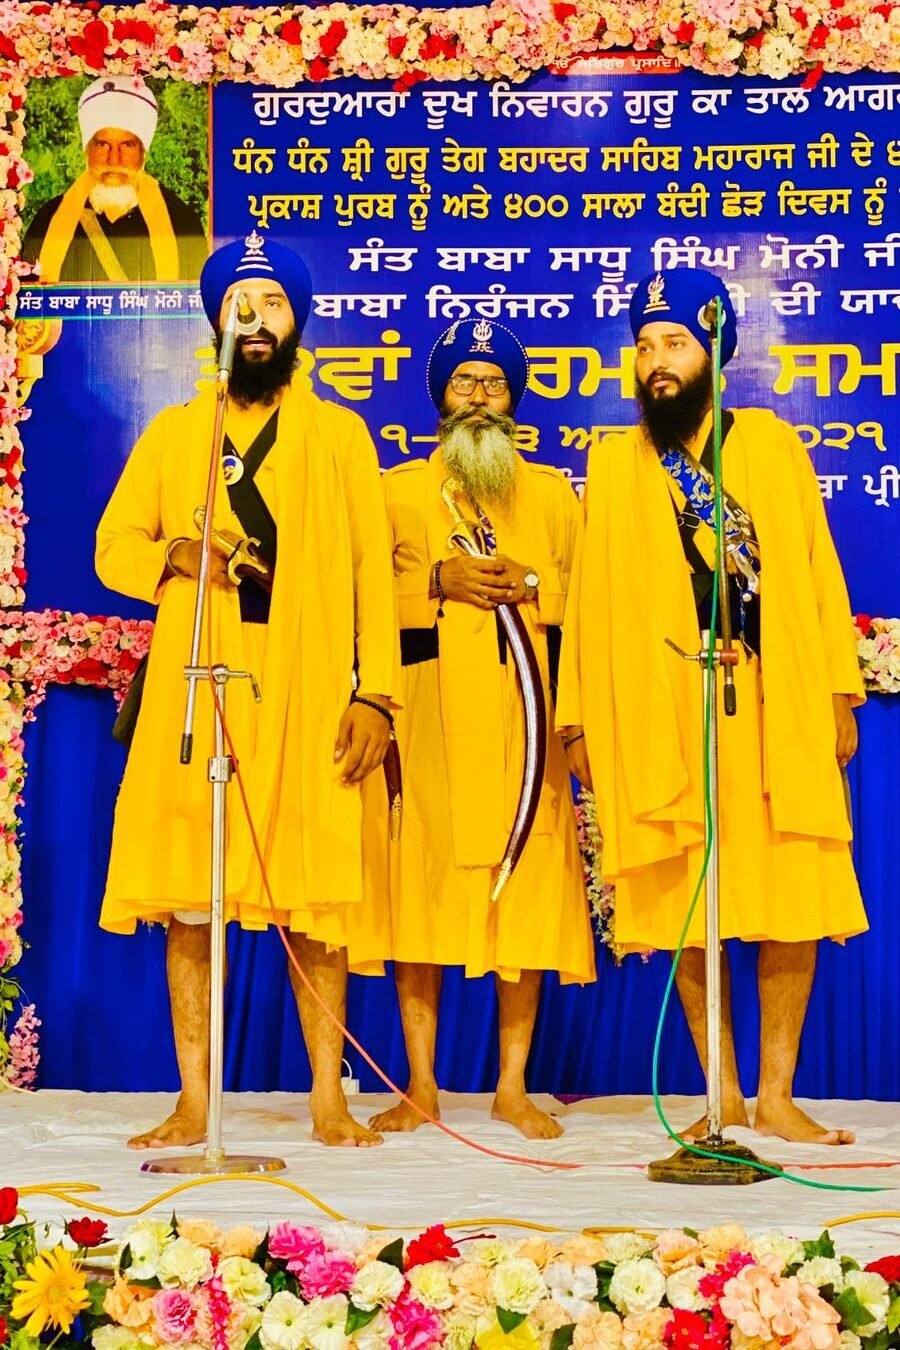 The 34th three-day Gurmat Samagam concluded, was introduced to the ancient history by singing